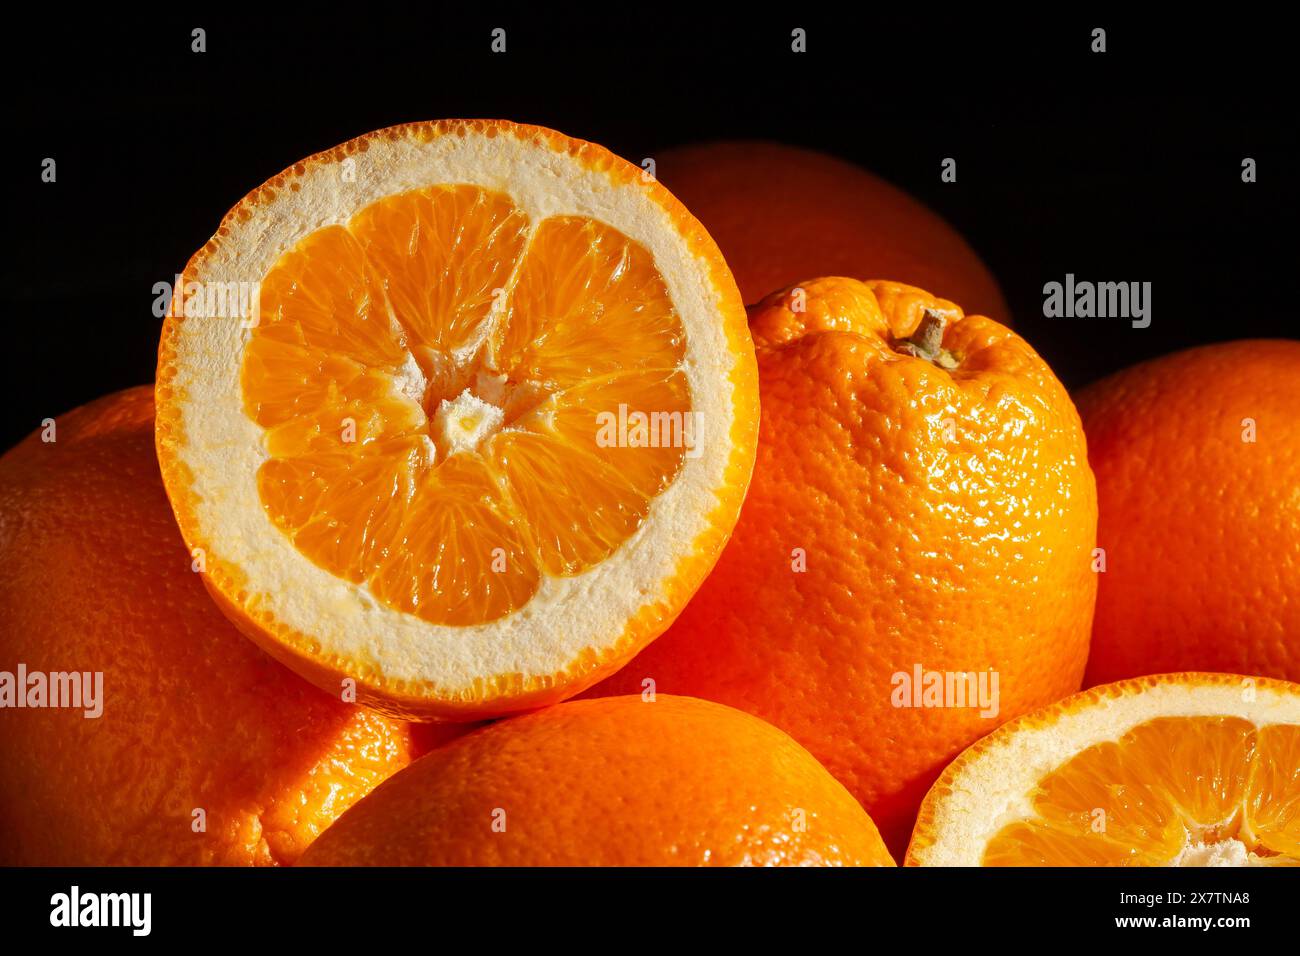 sliced calabrian oval blond oranges on black background Stock Photo